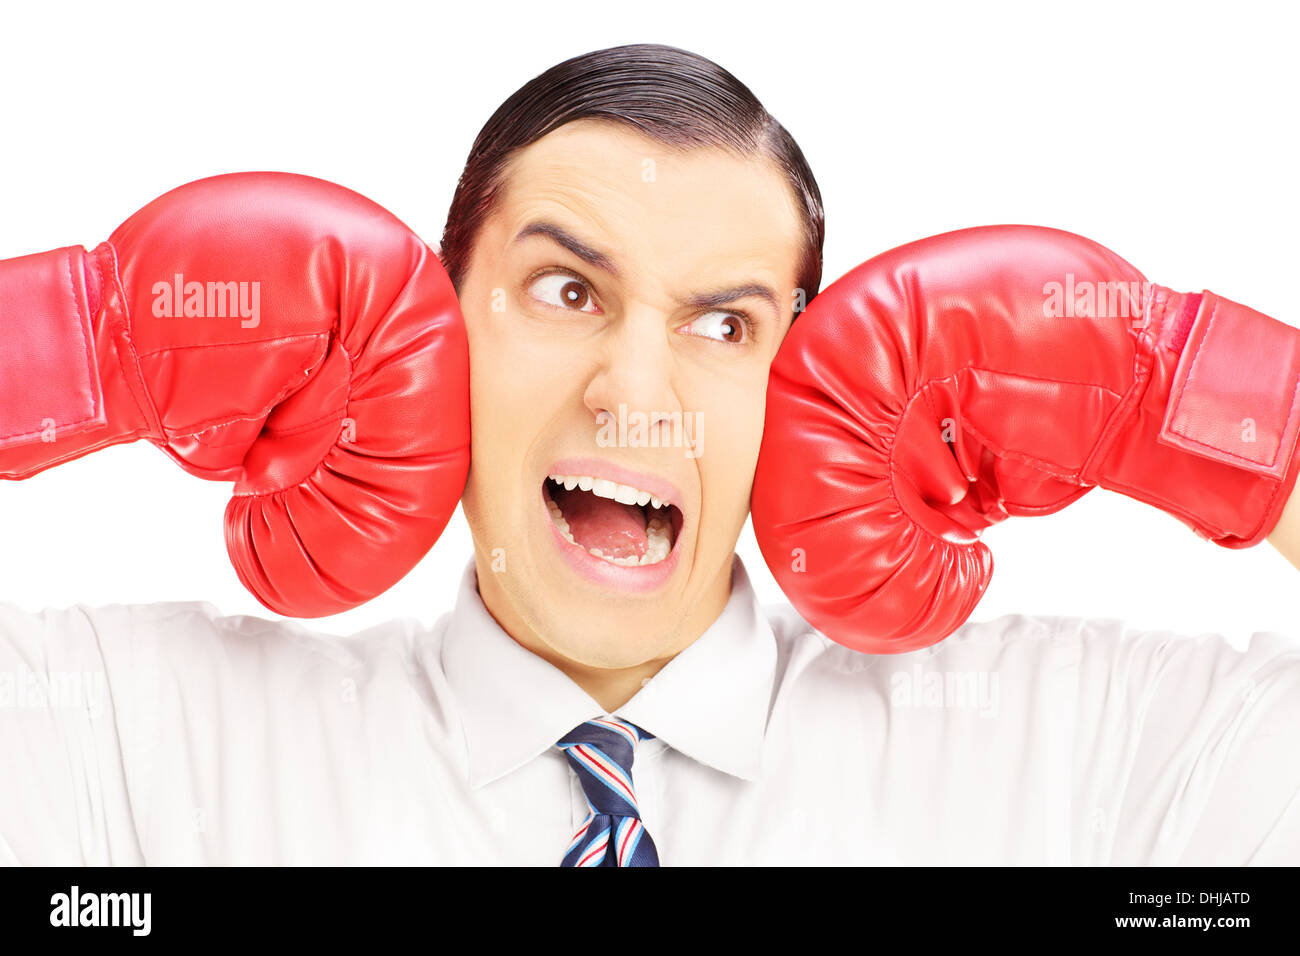 Young man punched by red boxing gloves Stock Photo - Alamy